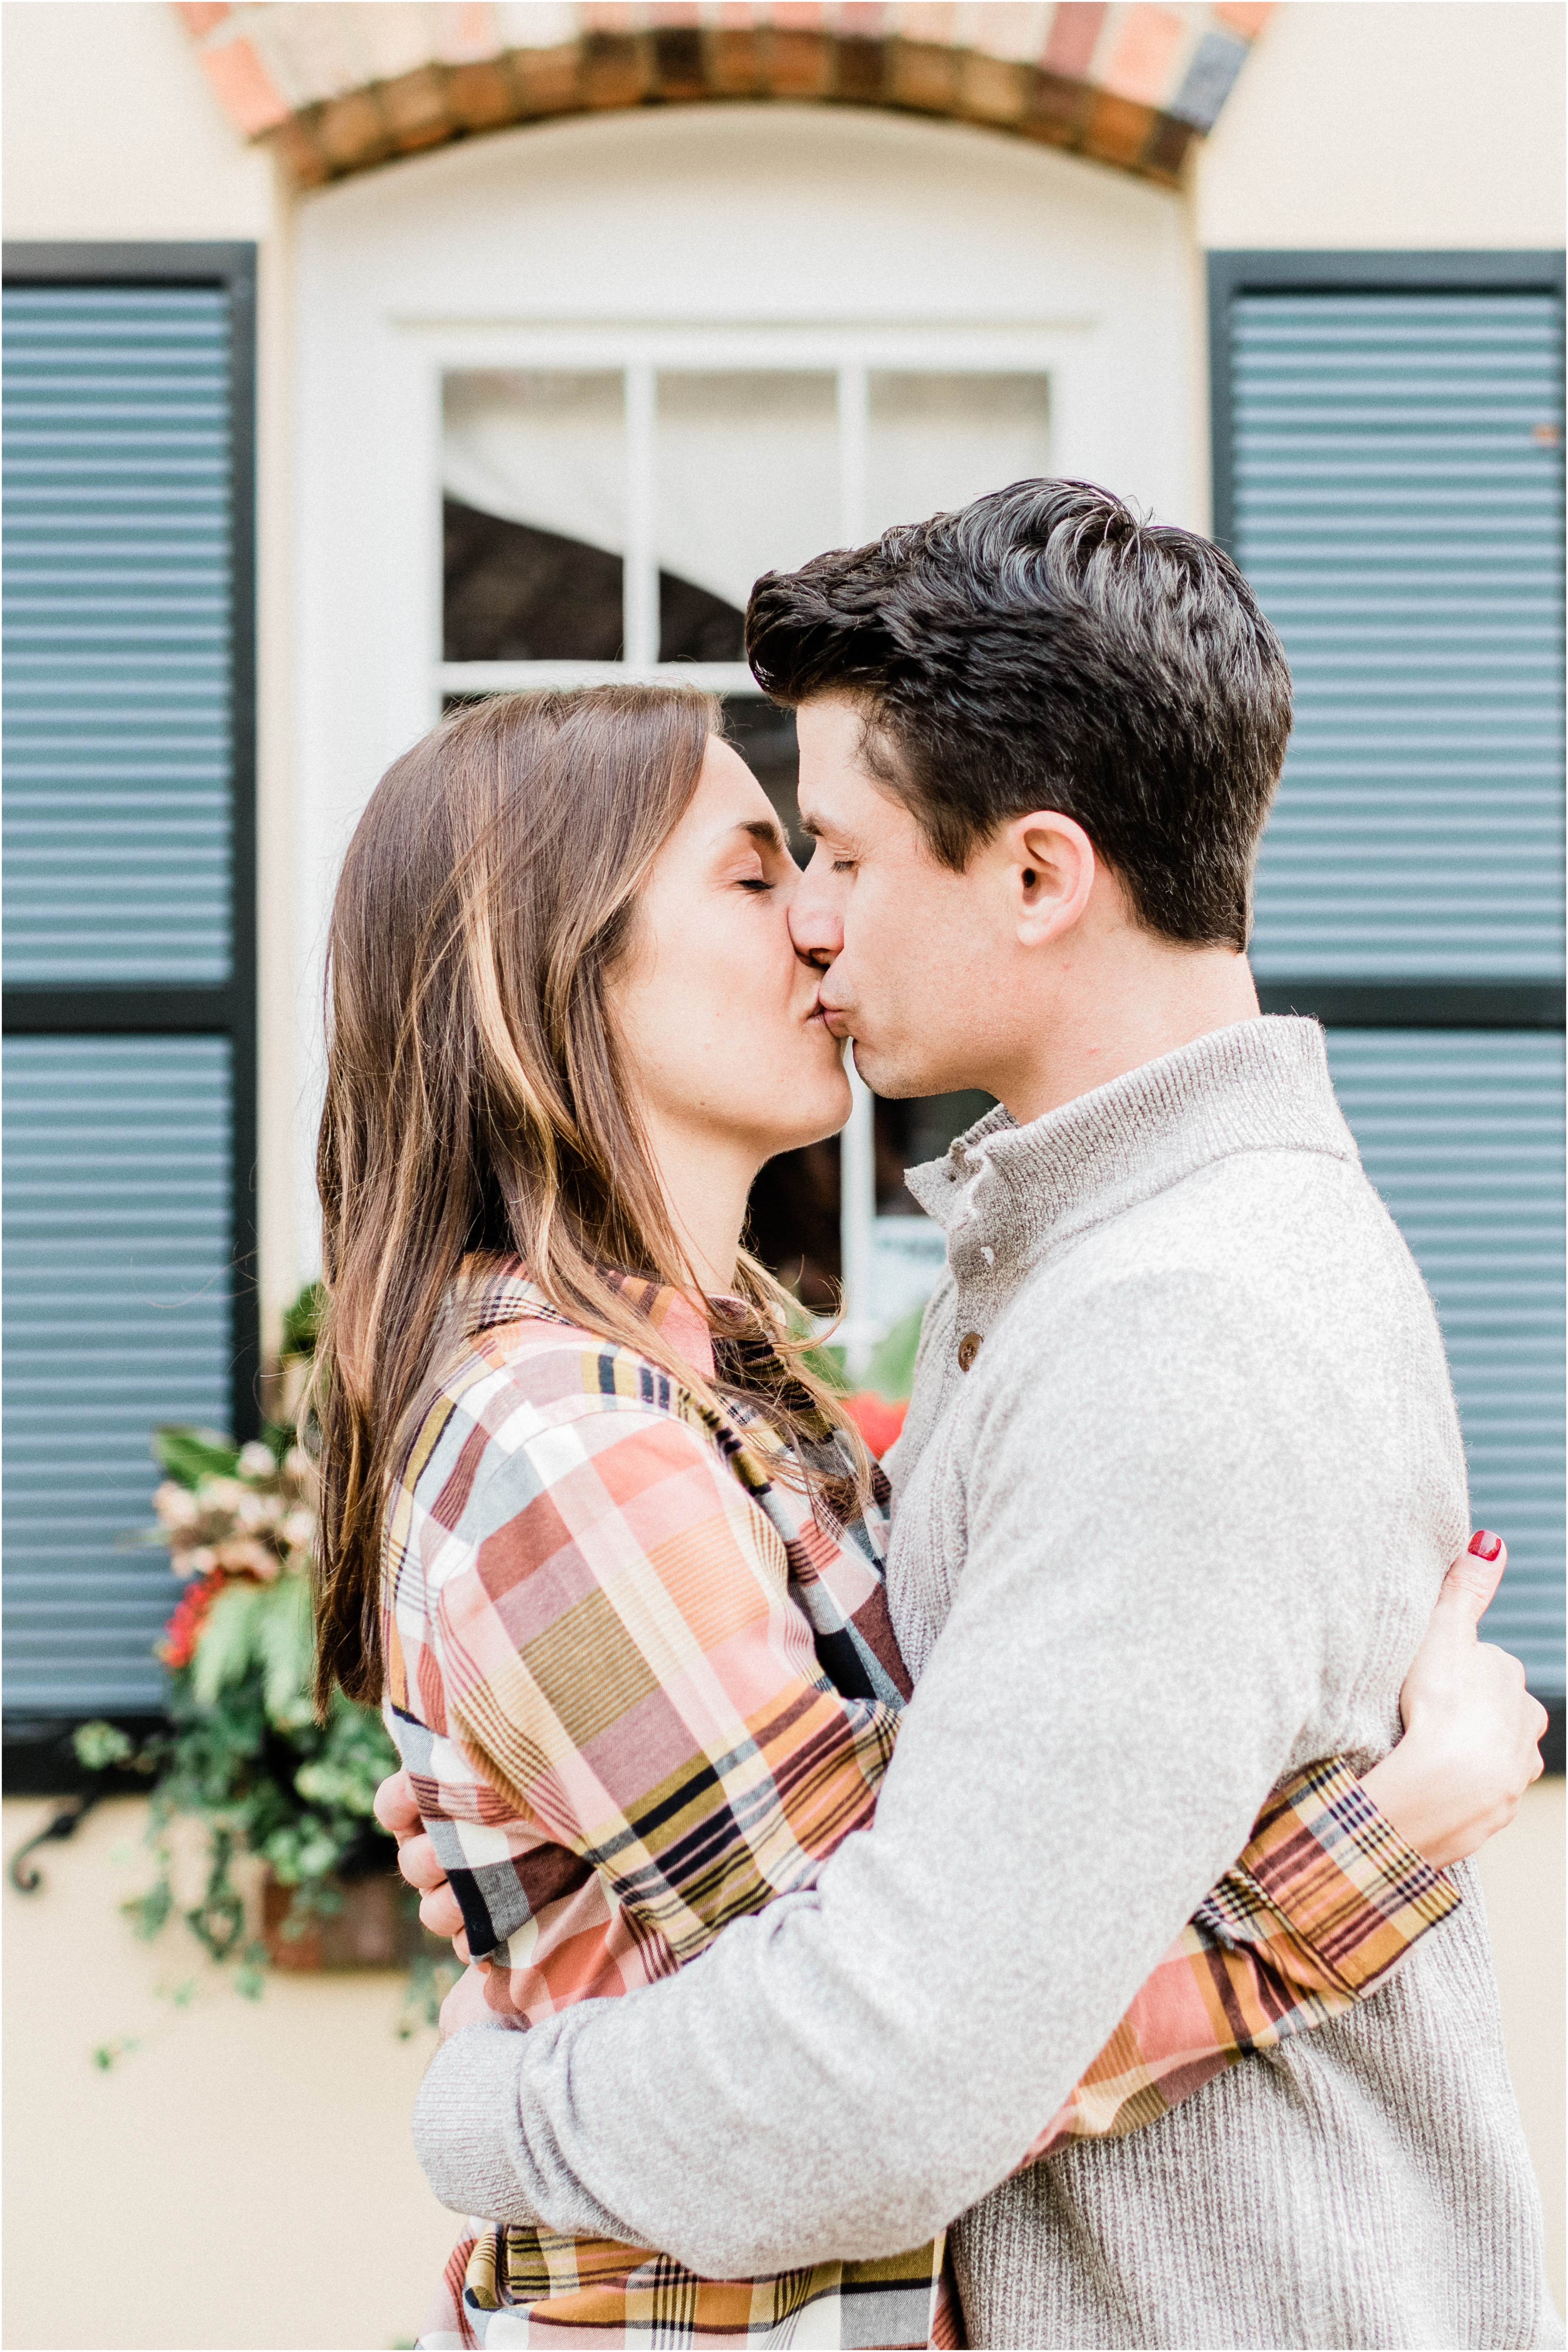 Winter downtown Greenville engagement session